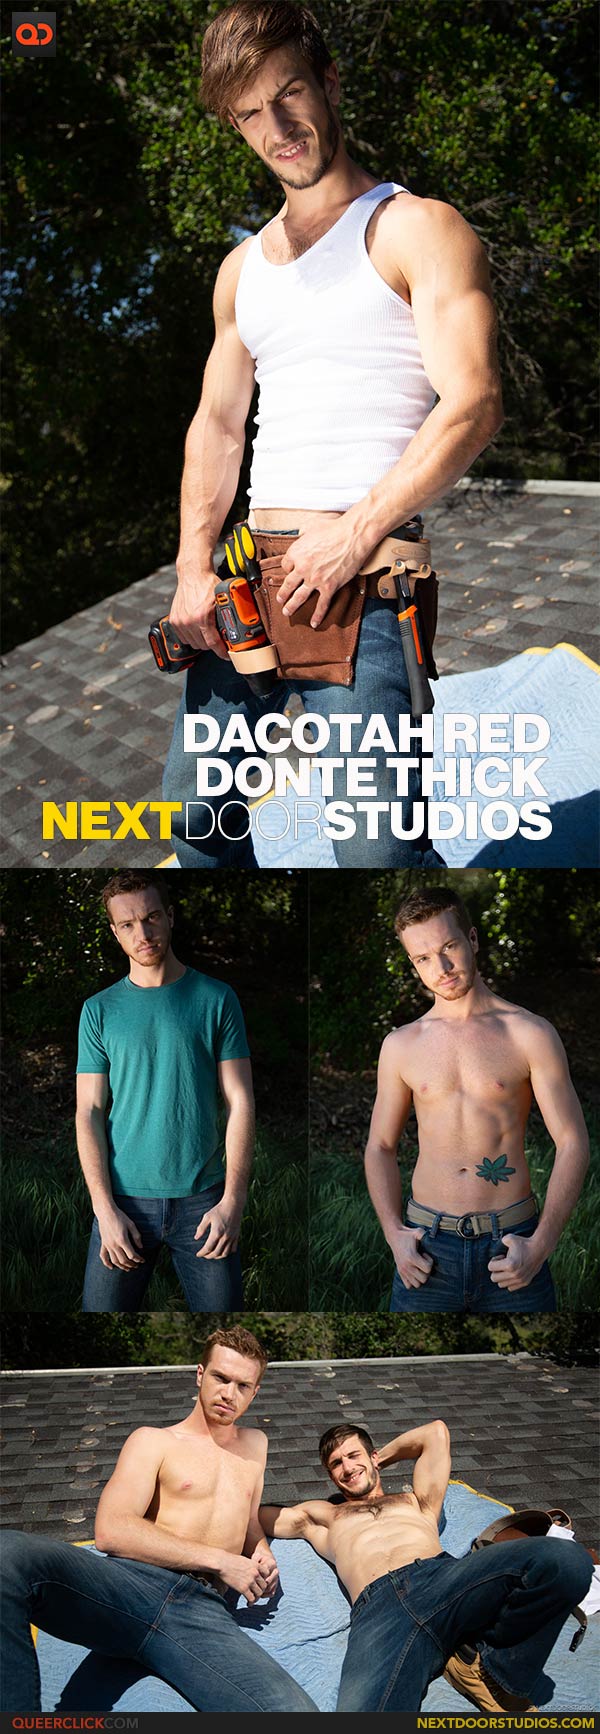 Next Door Studios: Donte Thick and Dacotah Red